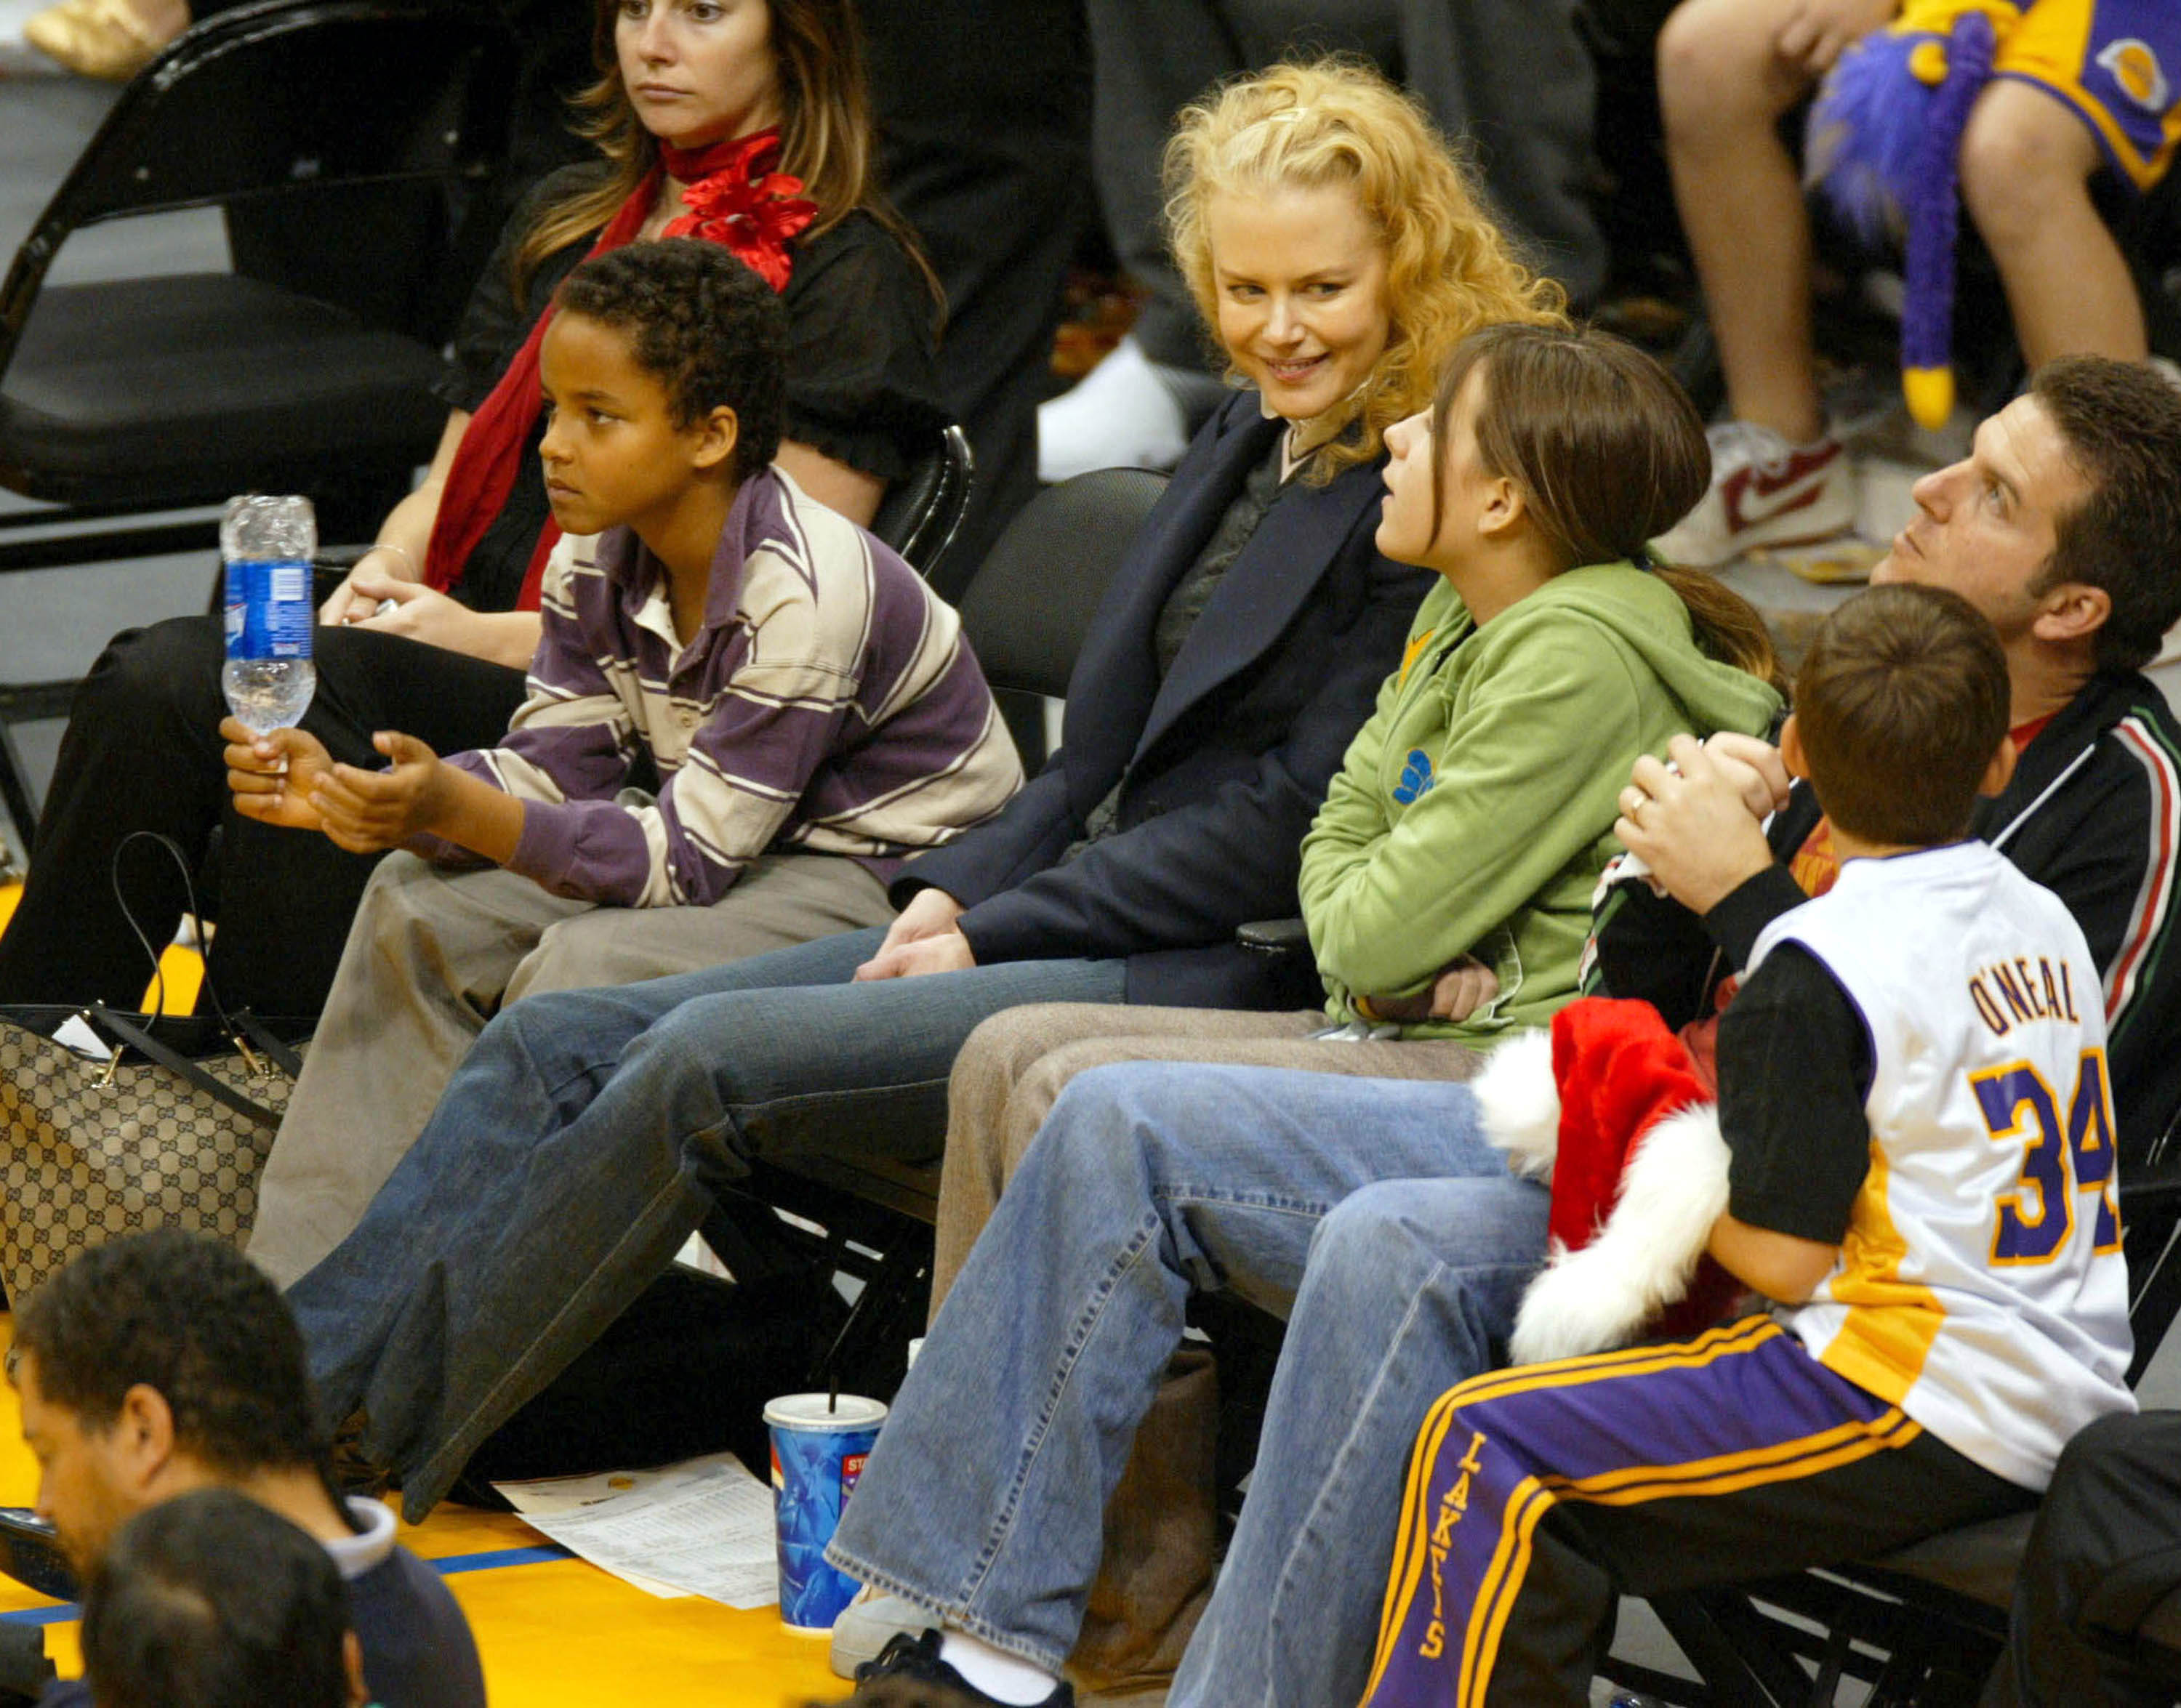 Nicole Kidman with Connor and Isabella Cruise at a game between the Los Angeles Lakers and the Miami Heat at the Staples Center on December 25, 2004 in Los Angeles, California | Source: Getty Images